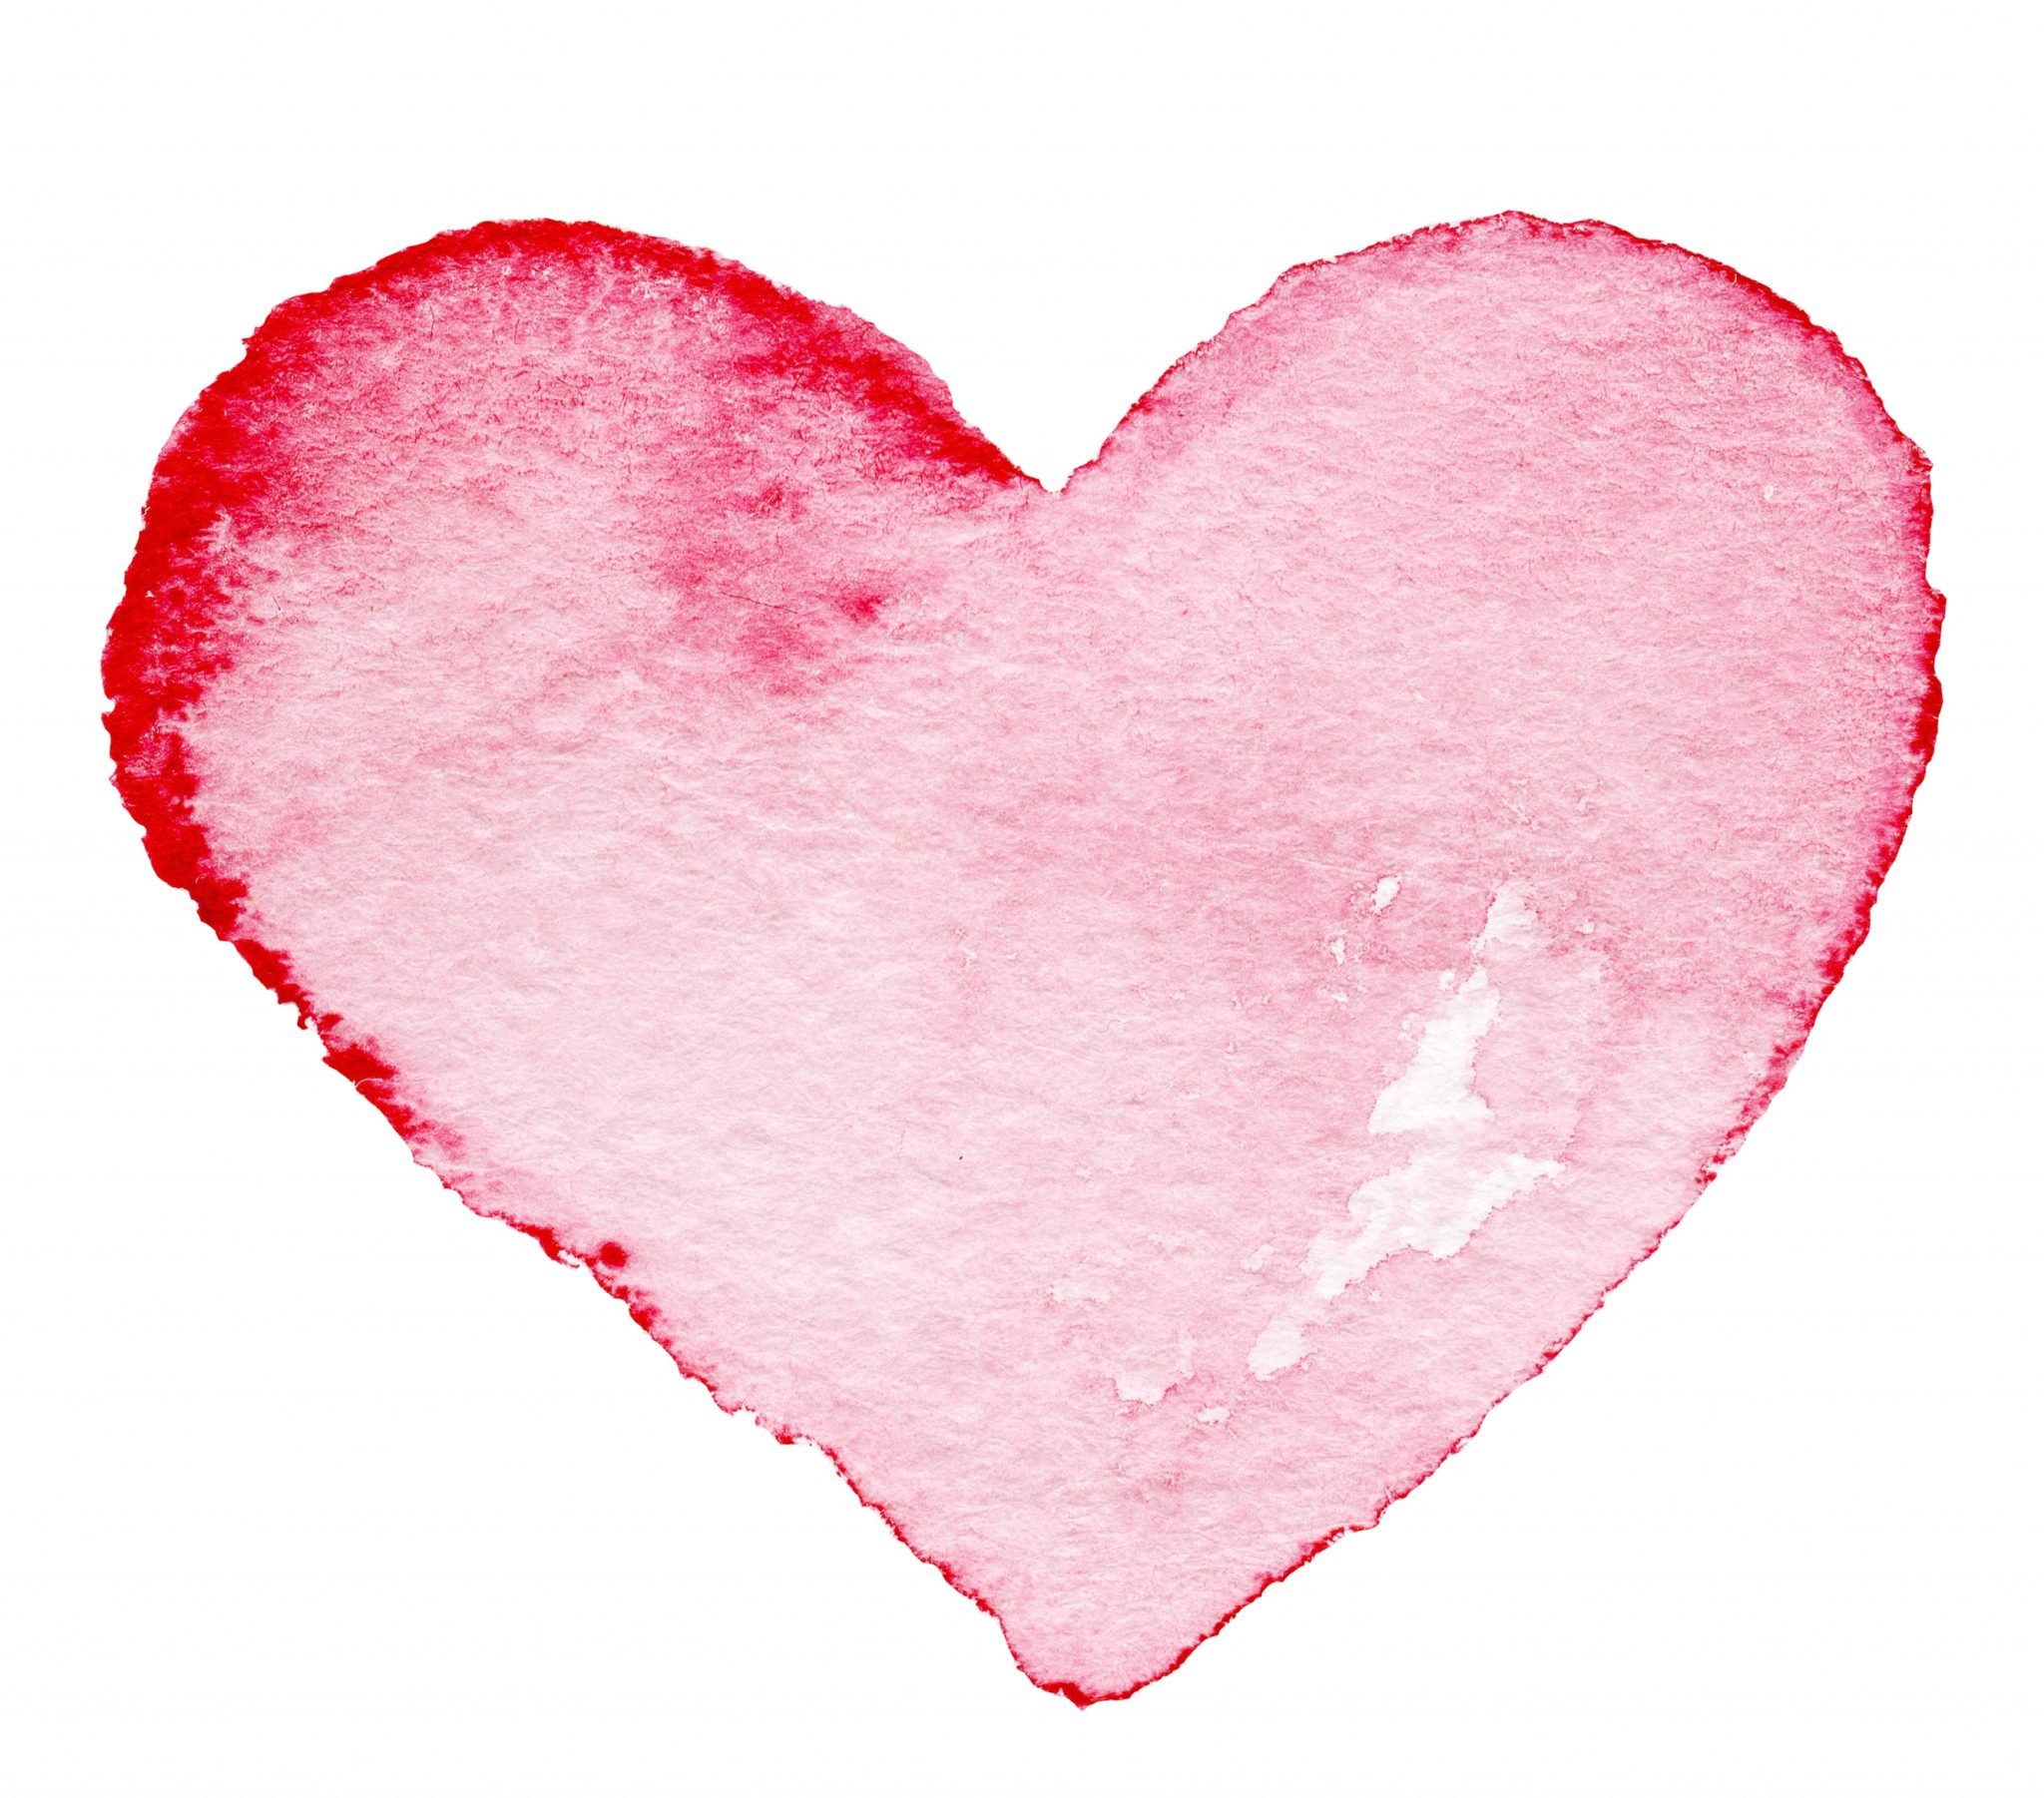 Watercolor Painted Red Heart Symbol For Your Design. Heart Shap